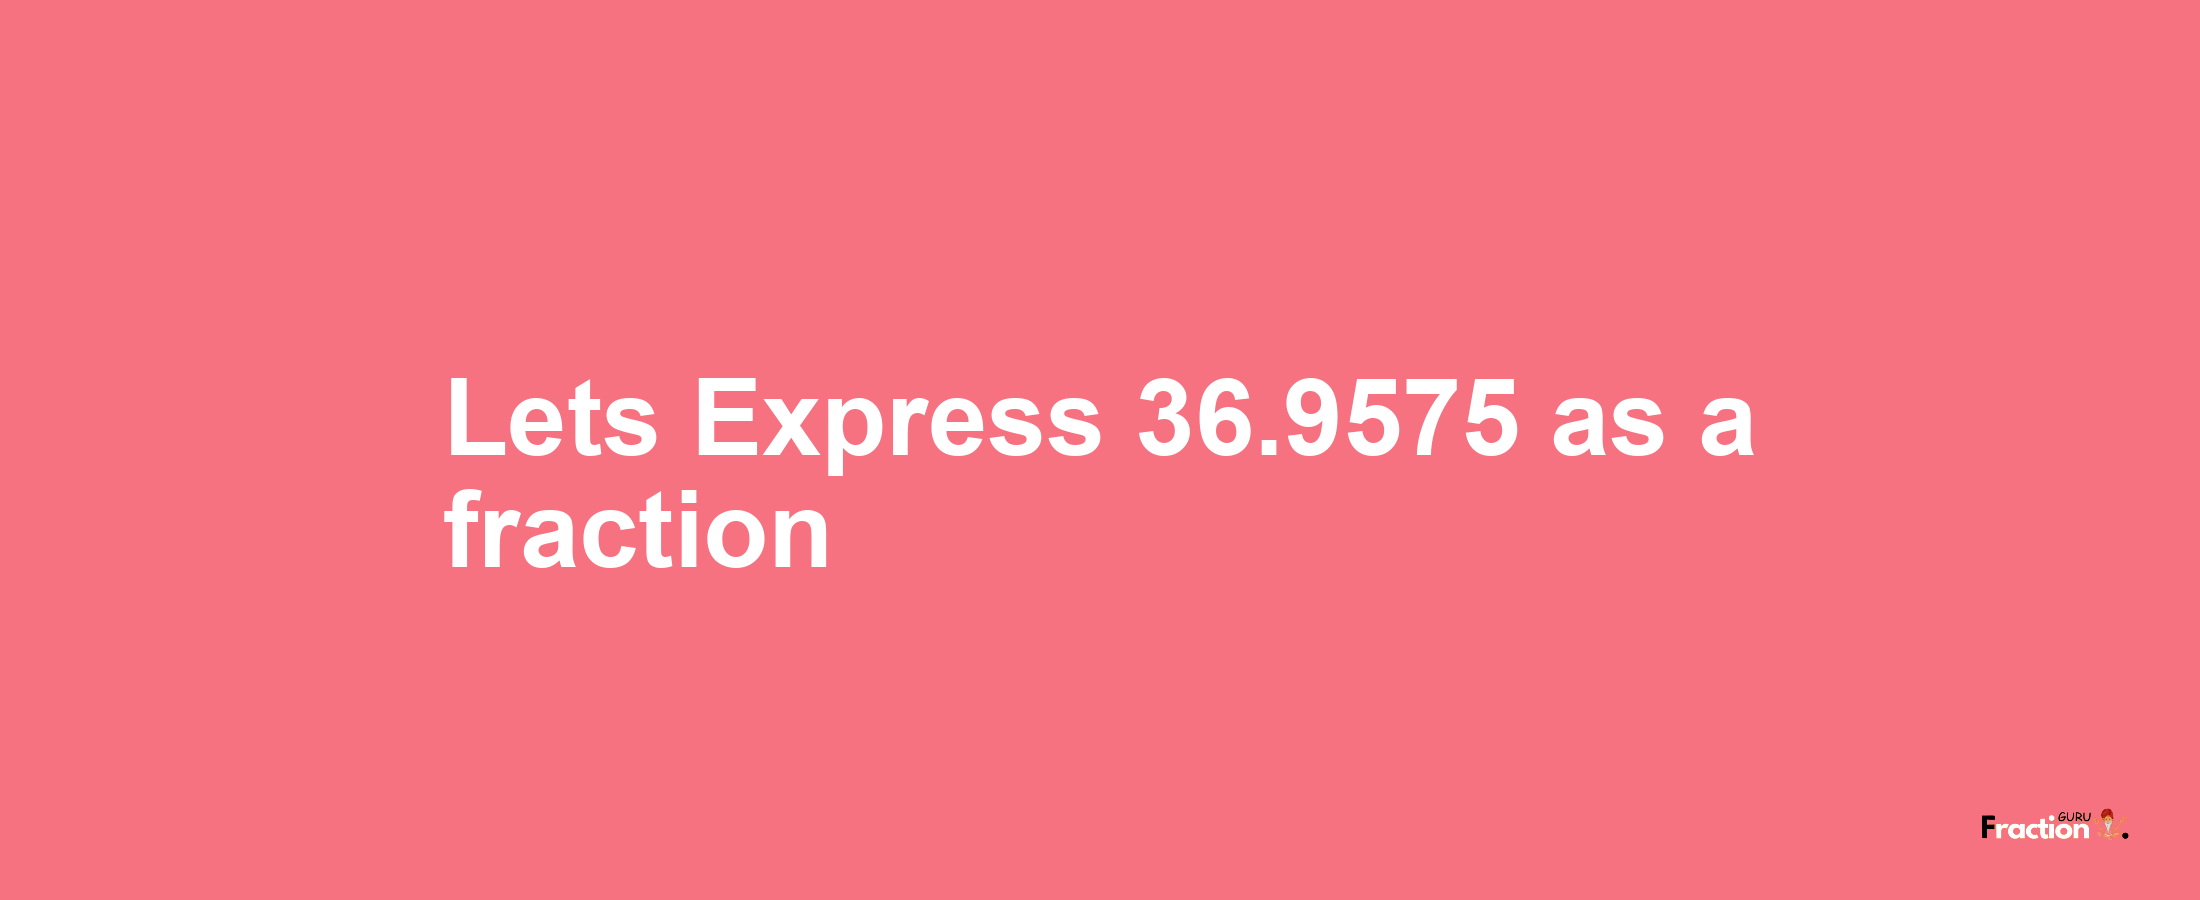 Lets Express 36.9575 as afraction